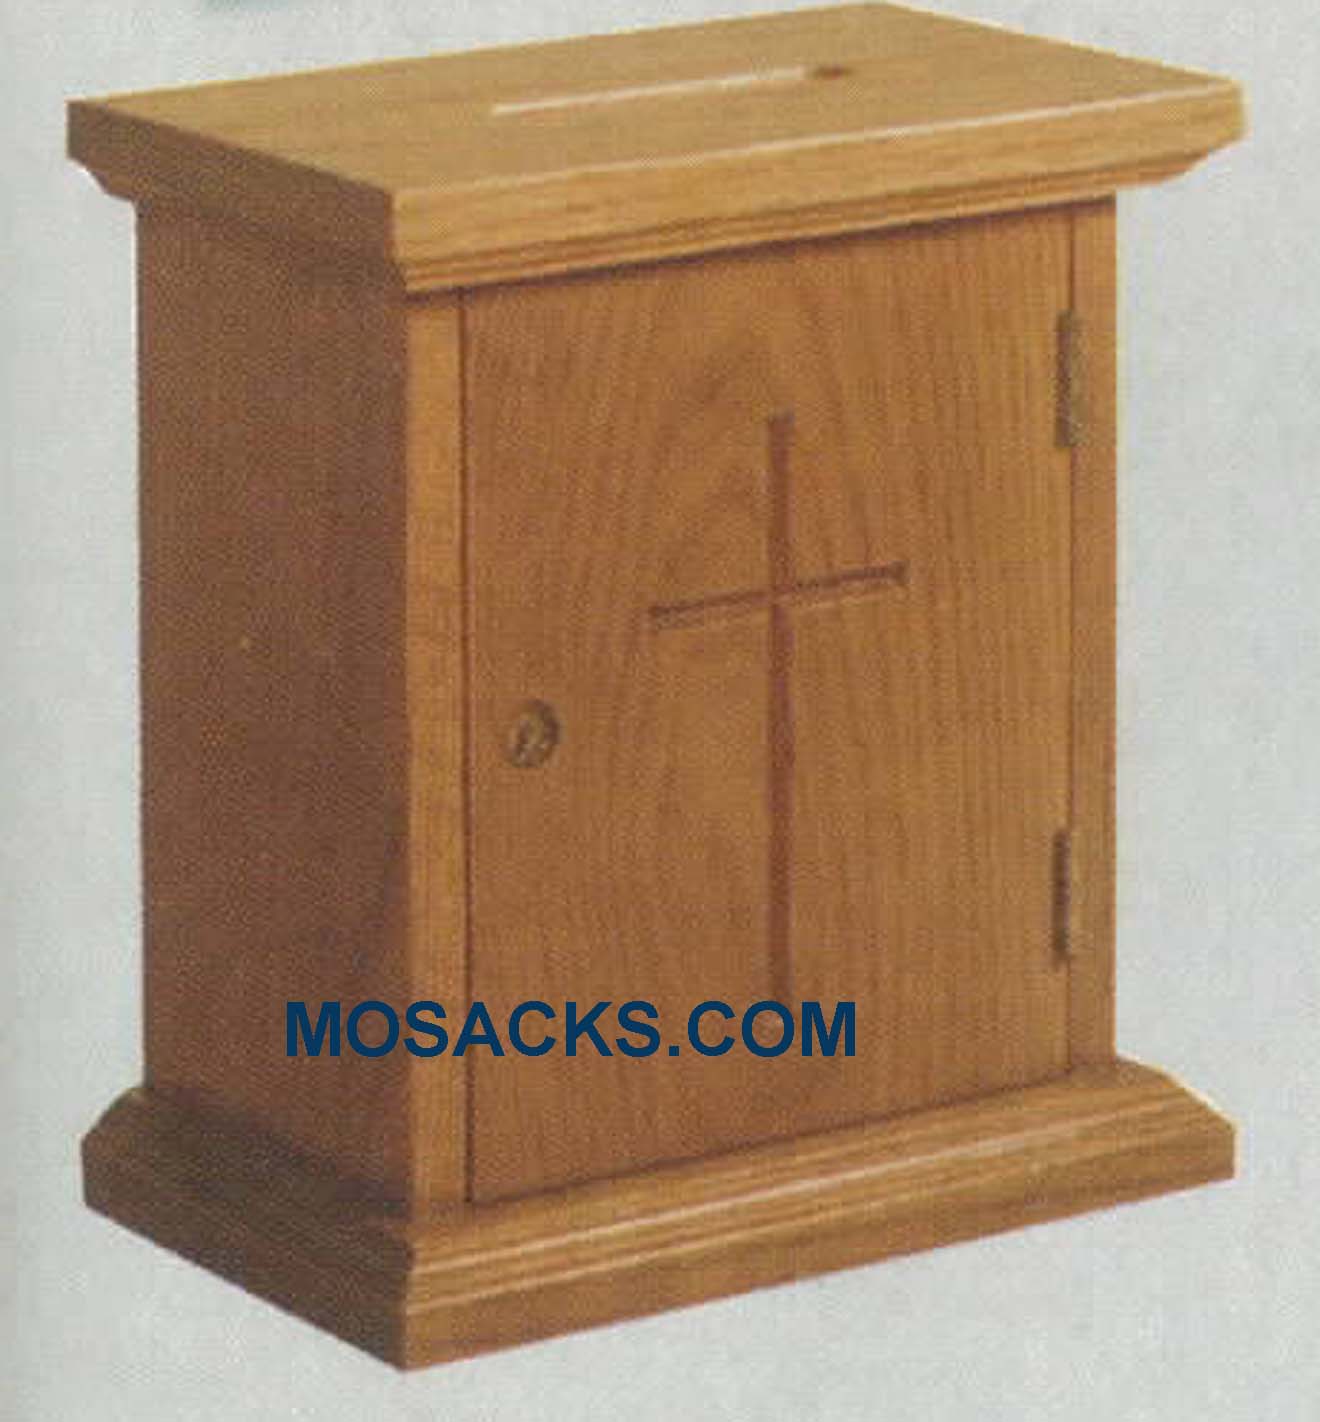 Wooden Wall Offering Box 10" w x 6" d x 11" h  #401 Wall Mount Offering Box   